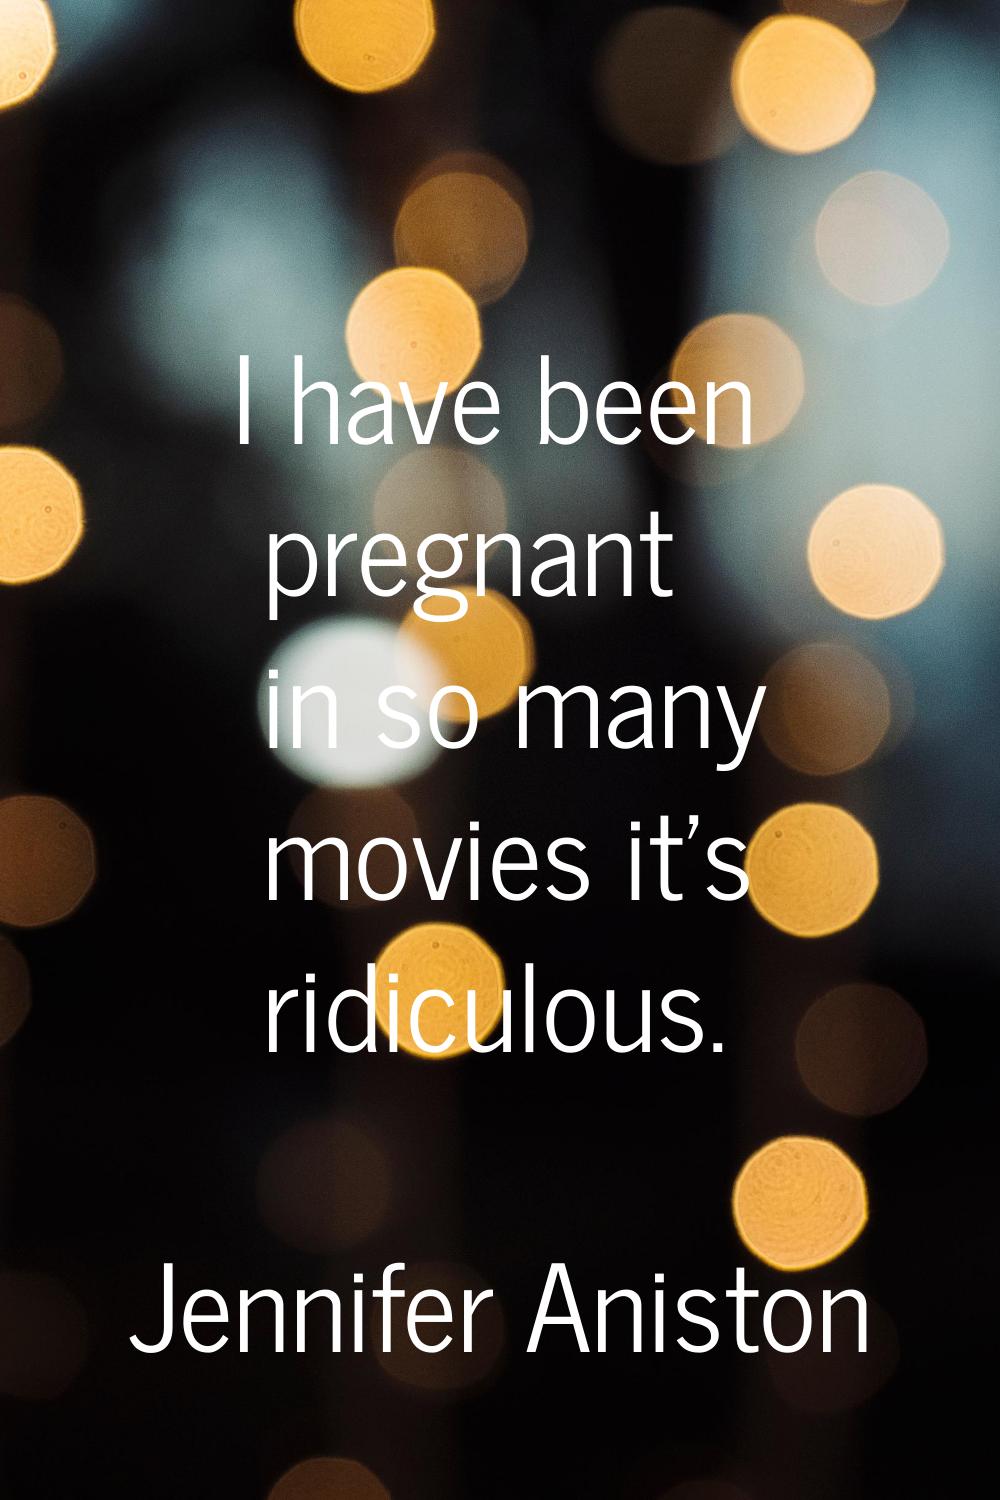 I have been pregnant in so many movies it's ridiculous.